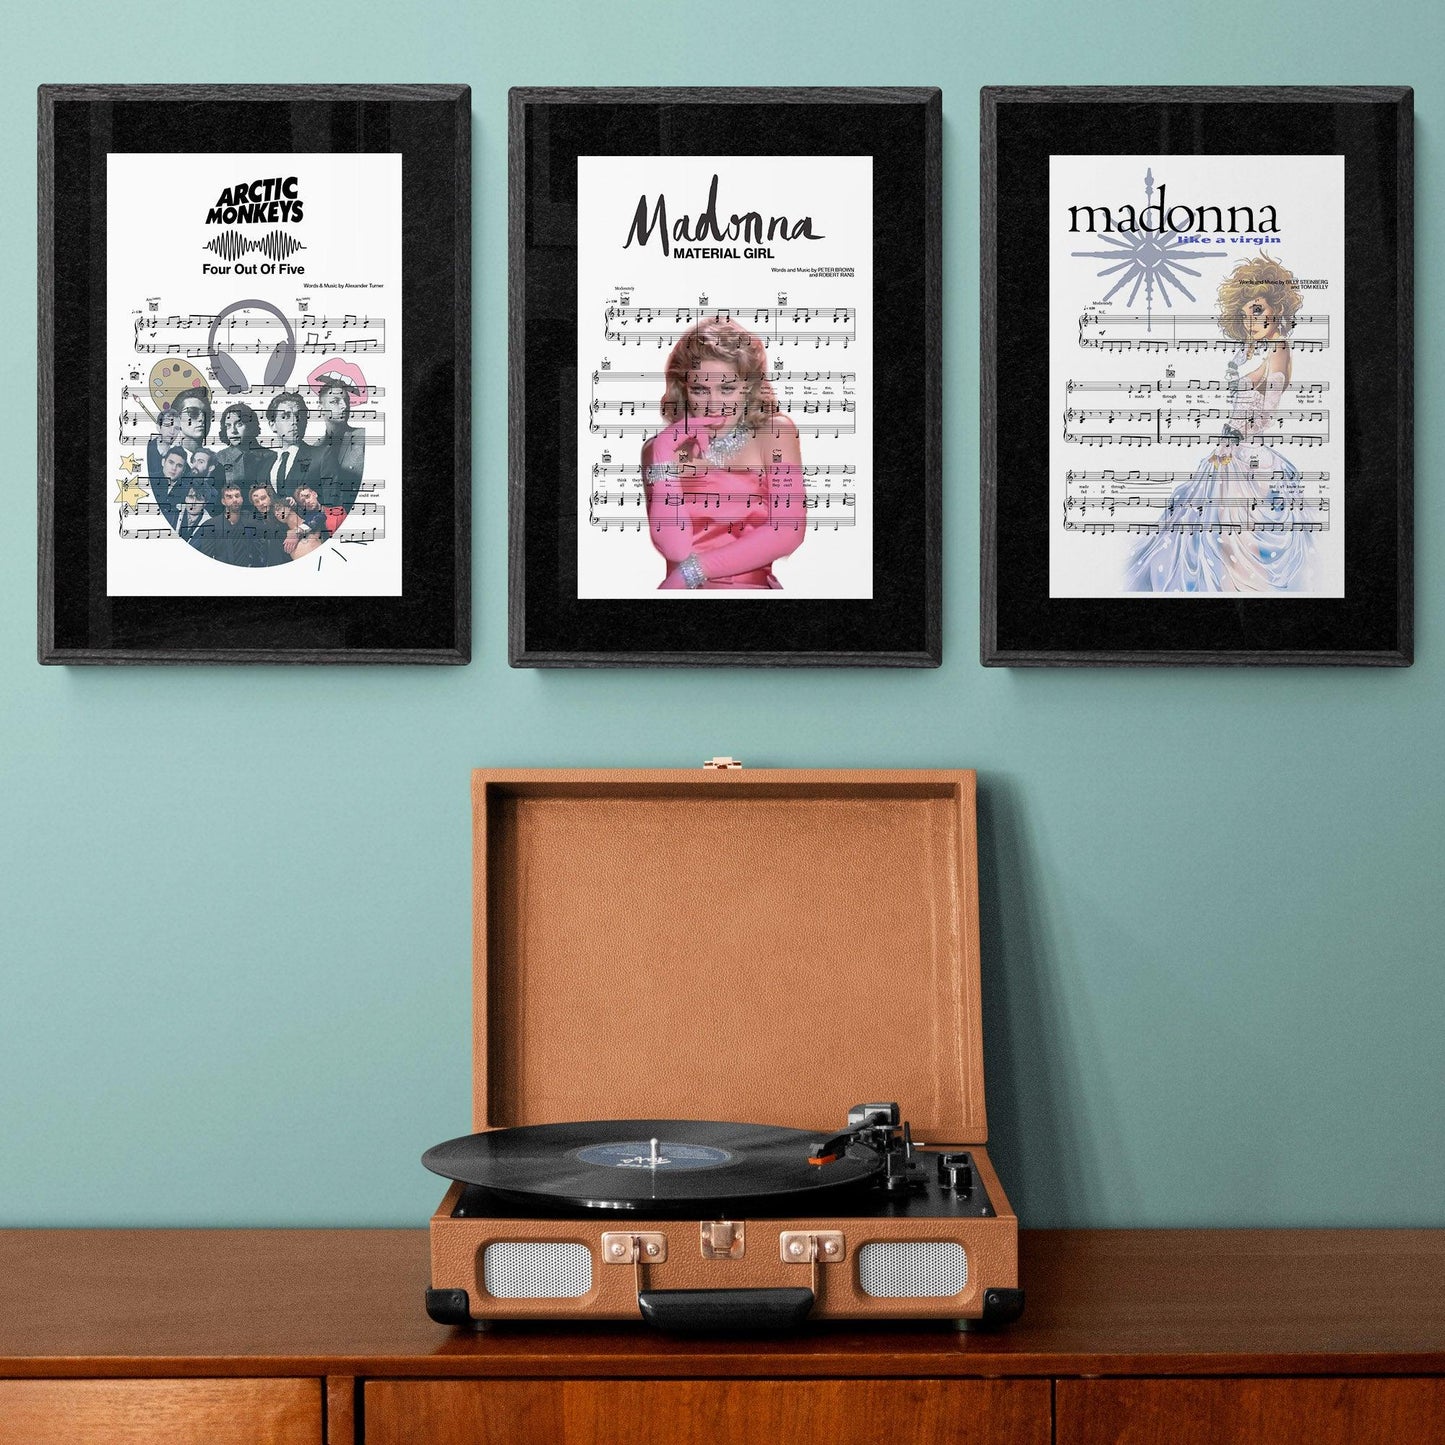 Madonna Material Girl Song Print | Song Music Sheet Notes Print Everyone has a favorite song especially Madonna Print, and now you can show the score as printed staff. The personal favorite song sheet print shows the song chosen as the score. 